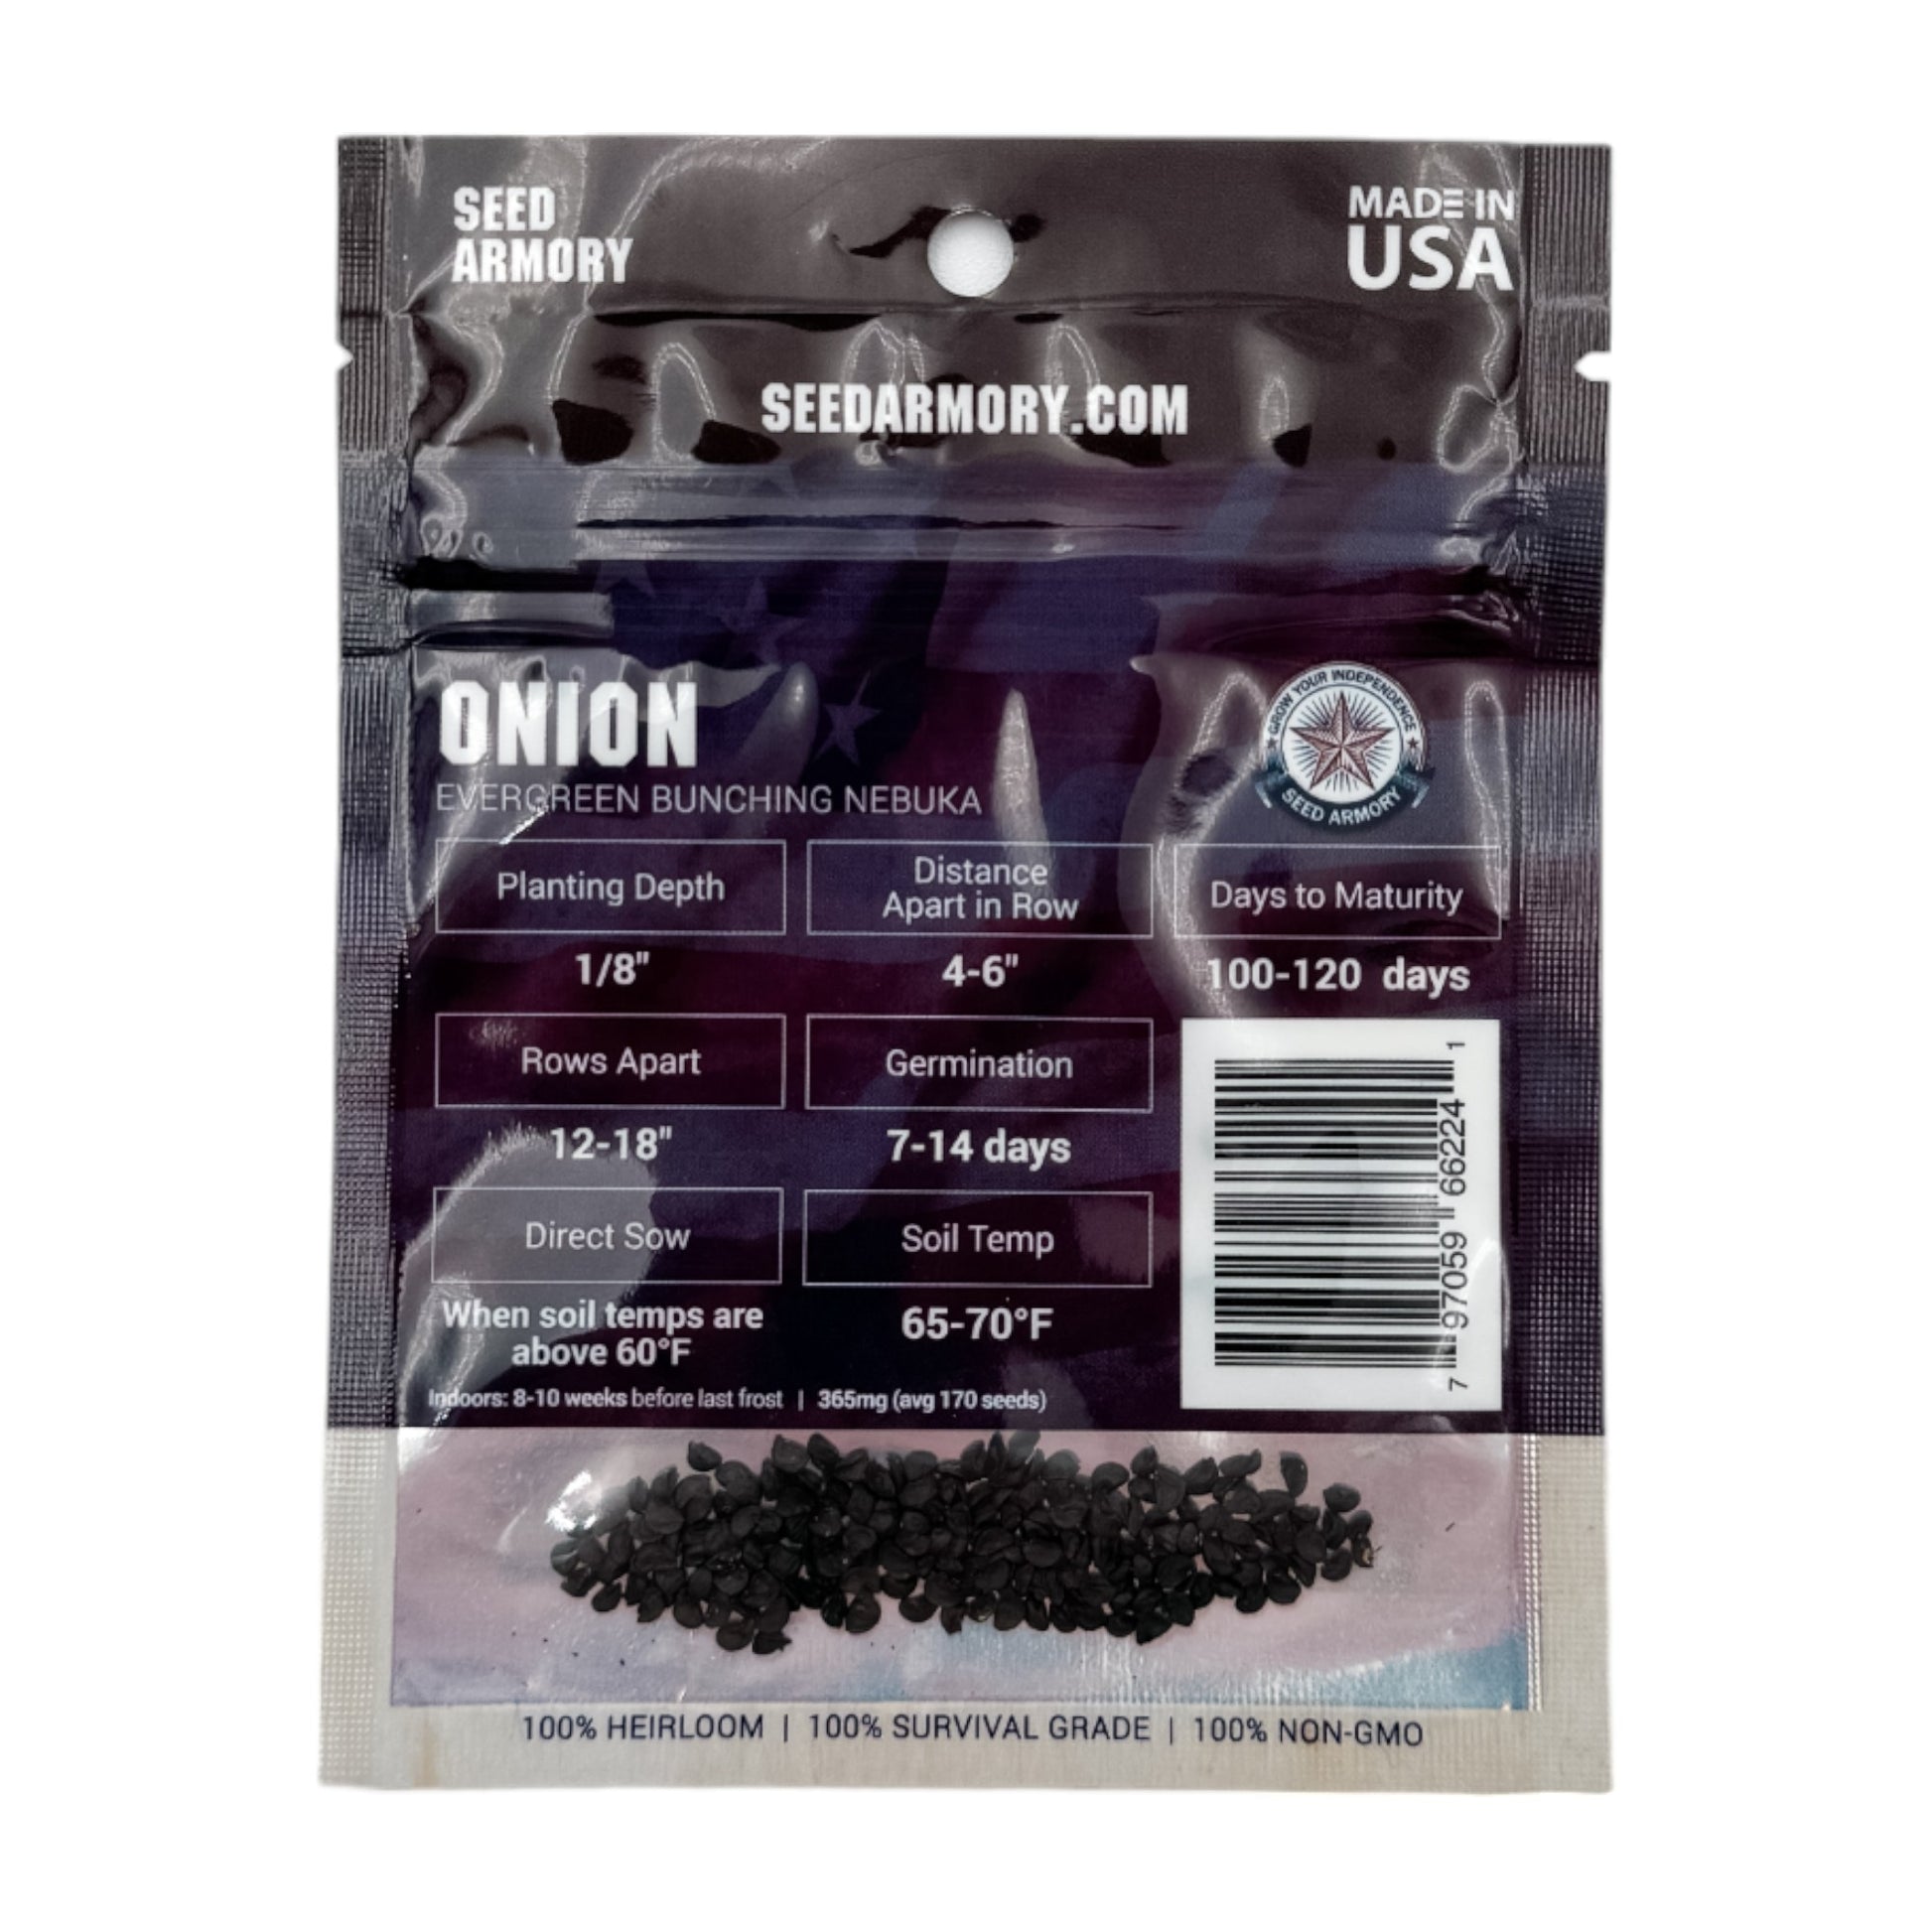 Reverse packet of Heirloom Evergreen Bunching Nebuka onion seeds with planting instructions